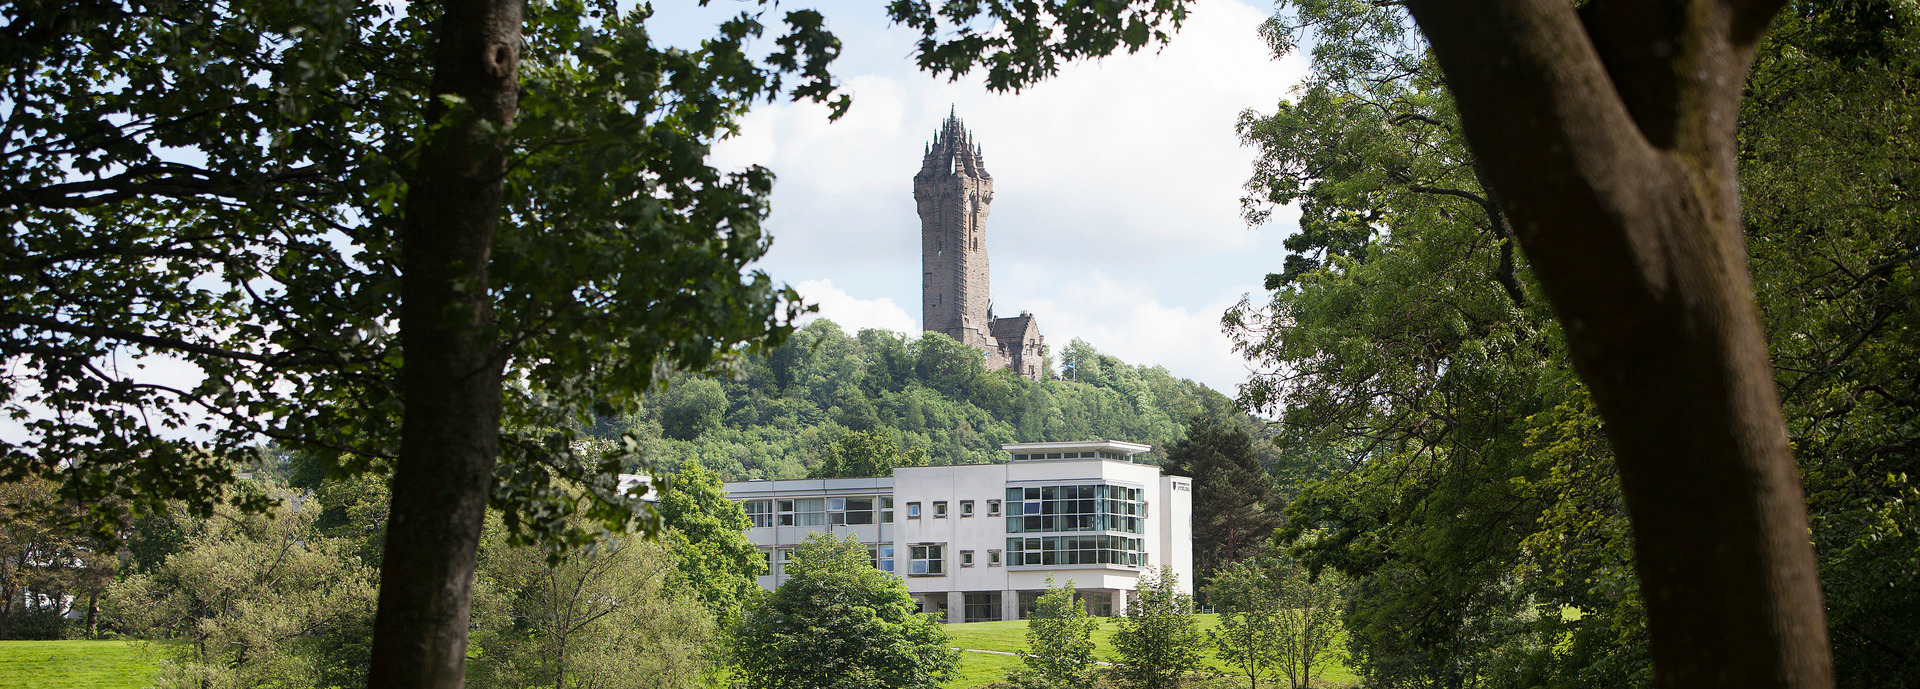 Image of the campus and Wallace Monument